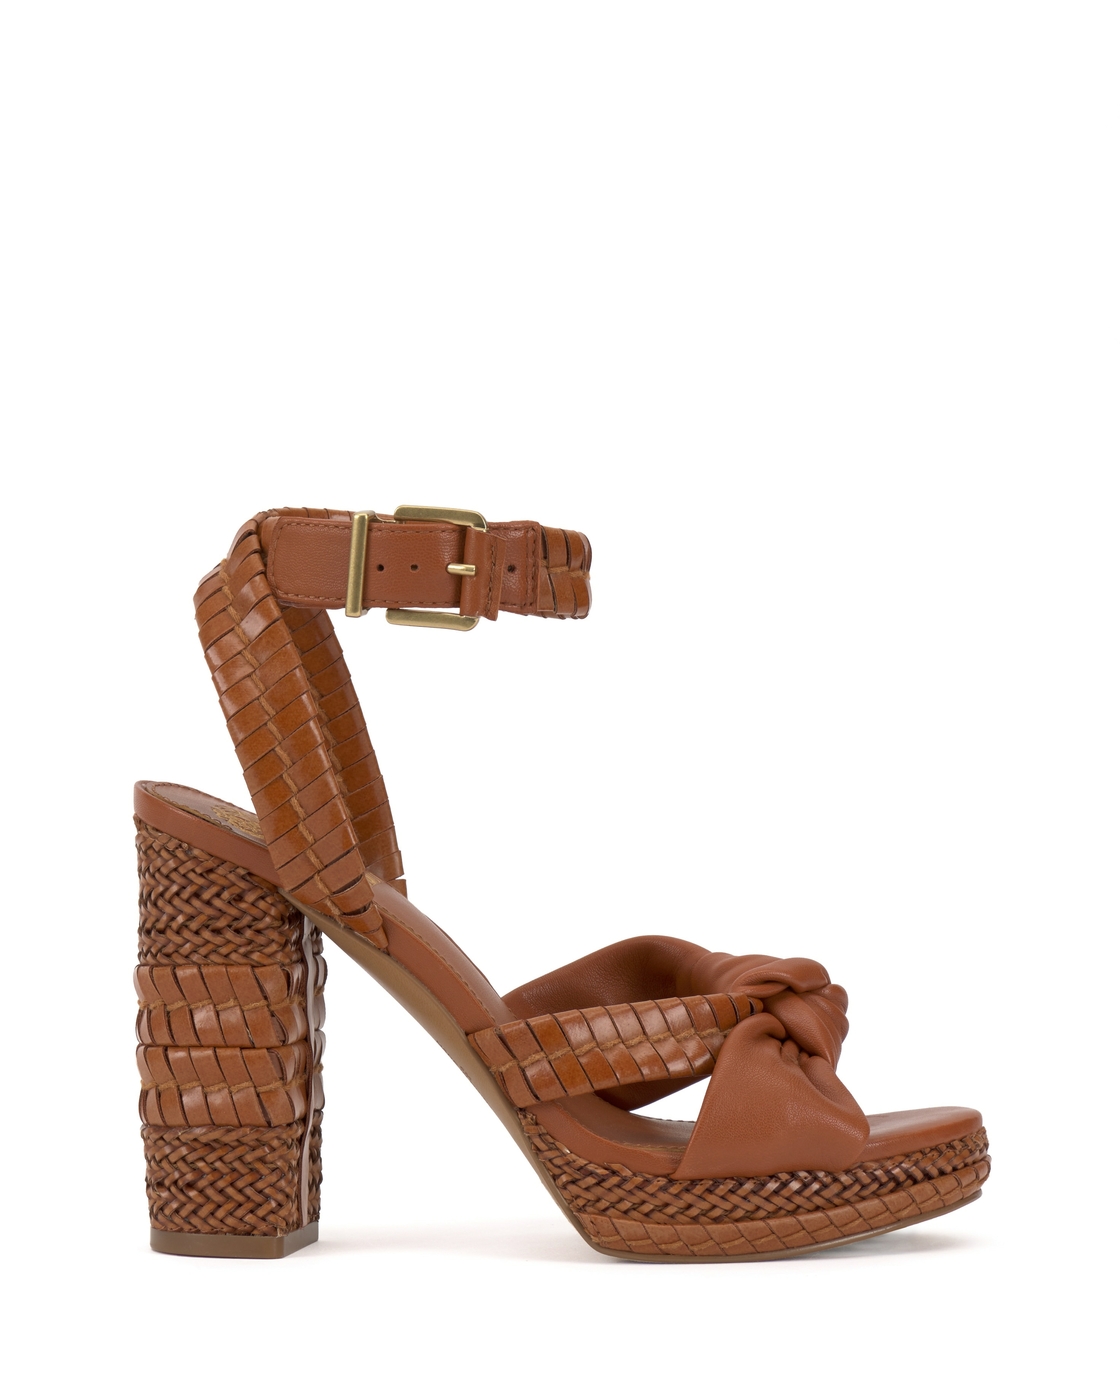 Shop all Vince Camuto